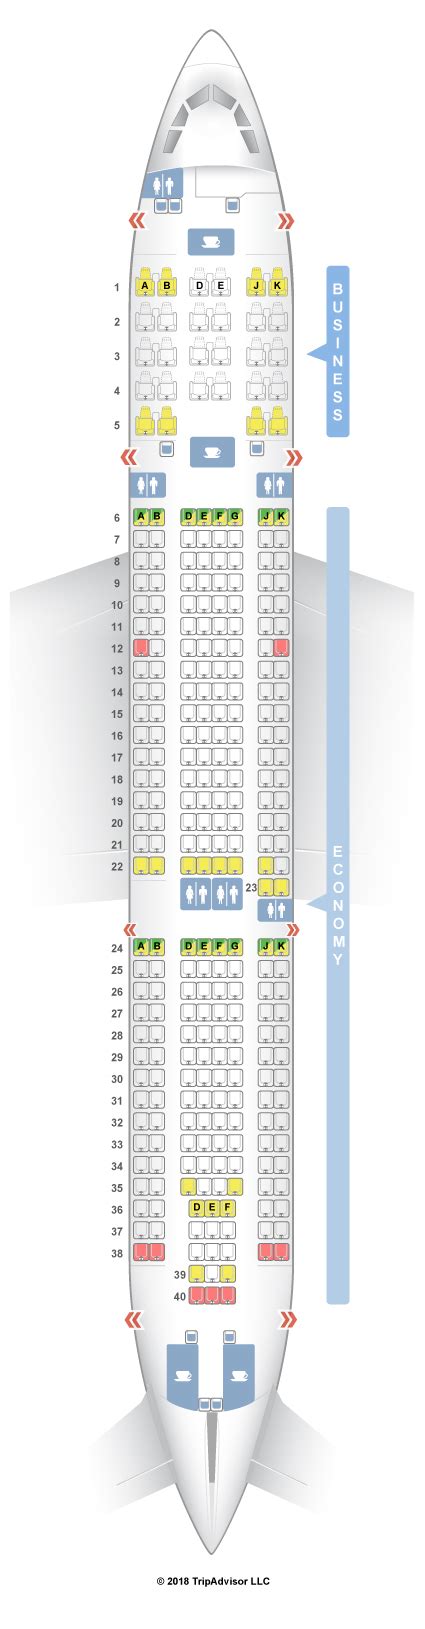 Turkish Airlines Airbus A Seat Map Image To U